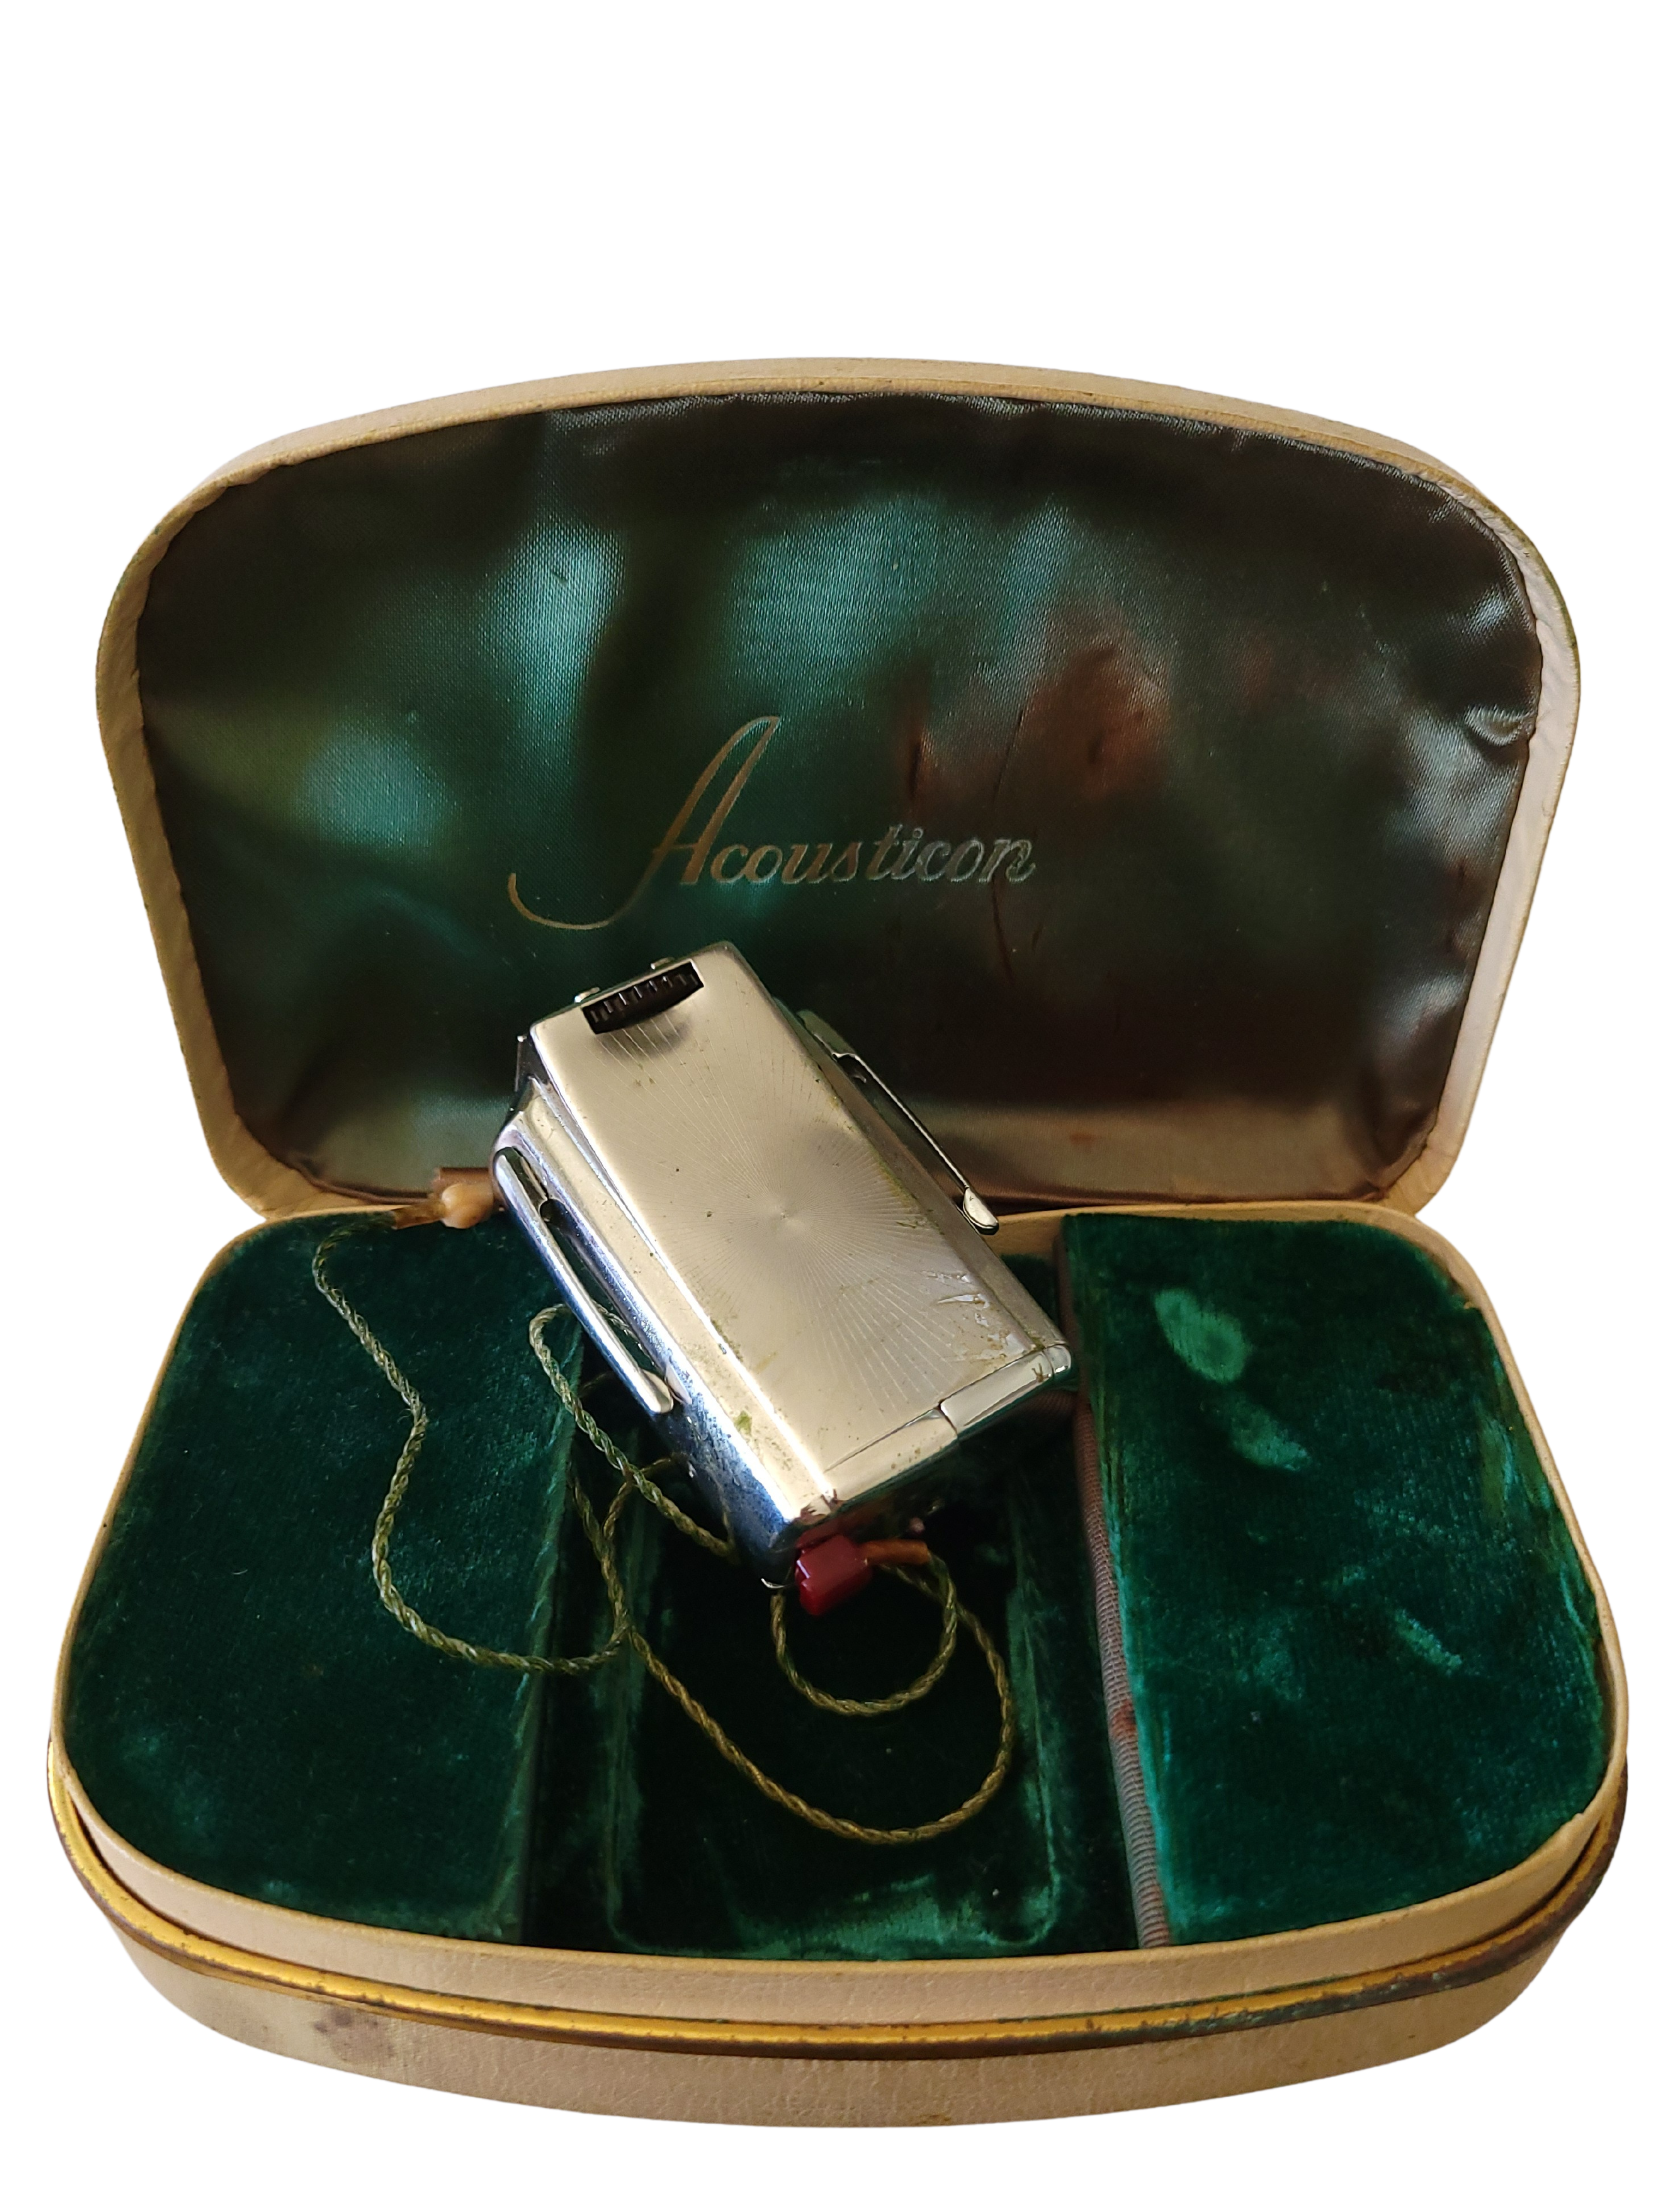 a small hearing aid strapped on a wristband in a green velvet case